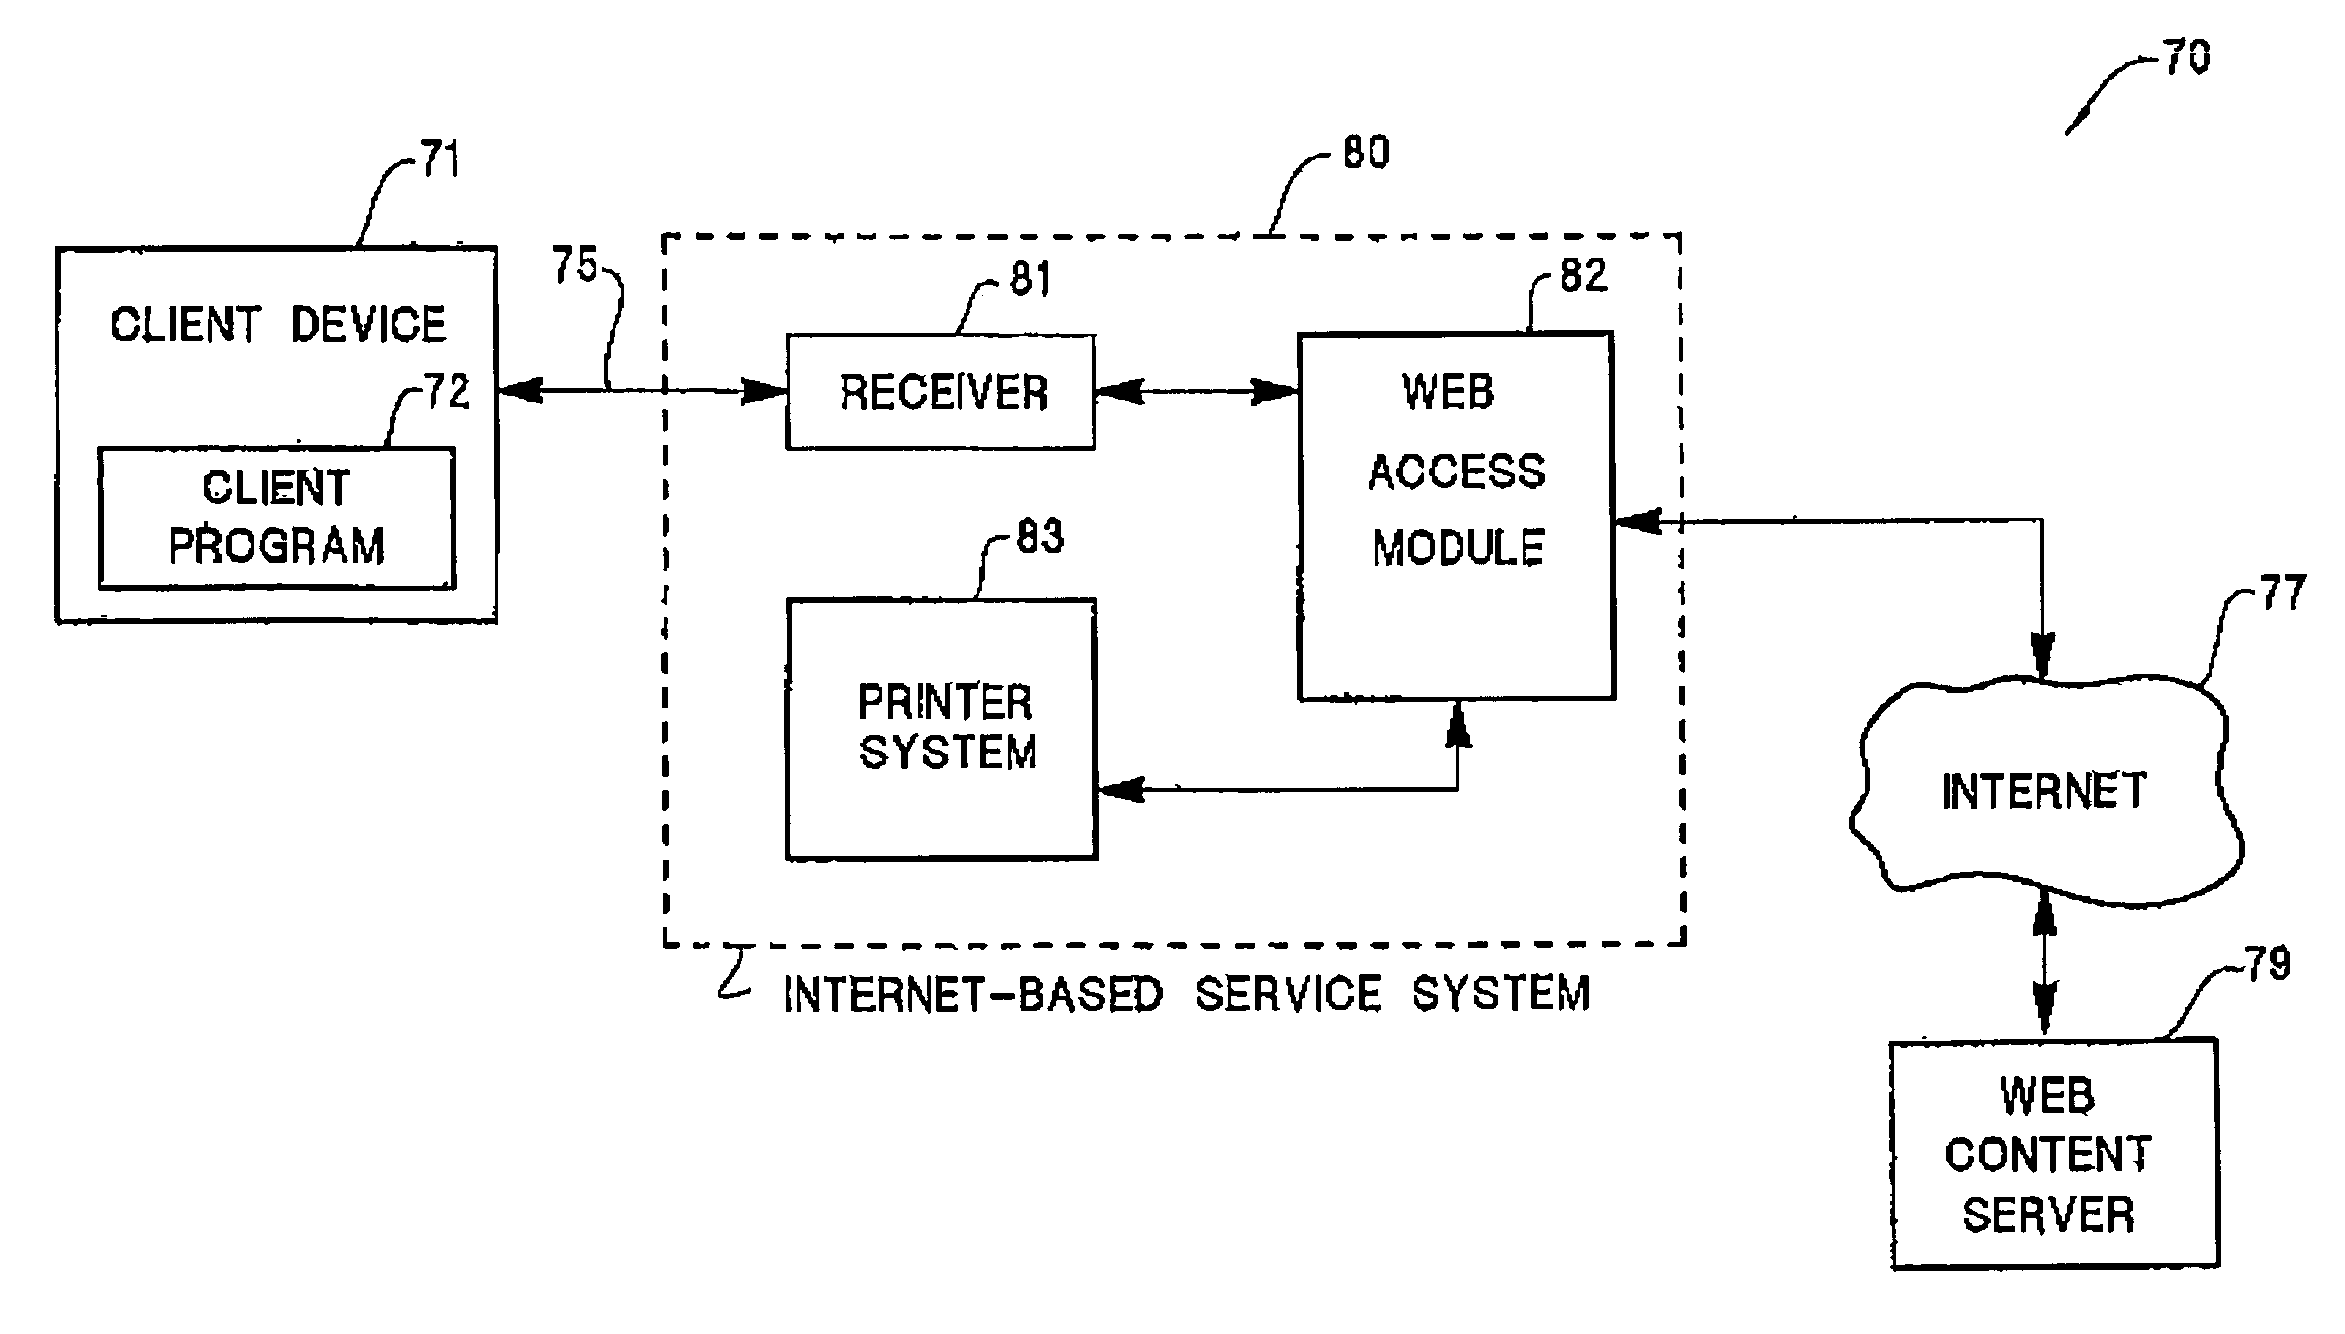 System for providing internet-related services in response to a handheld device that is not required to be internet-enabled